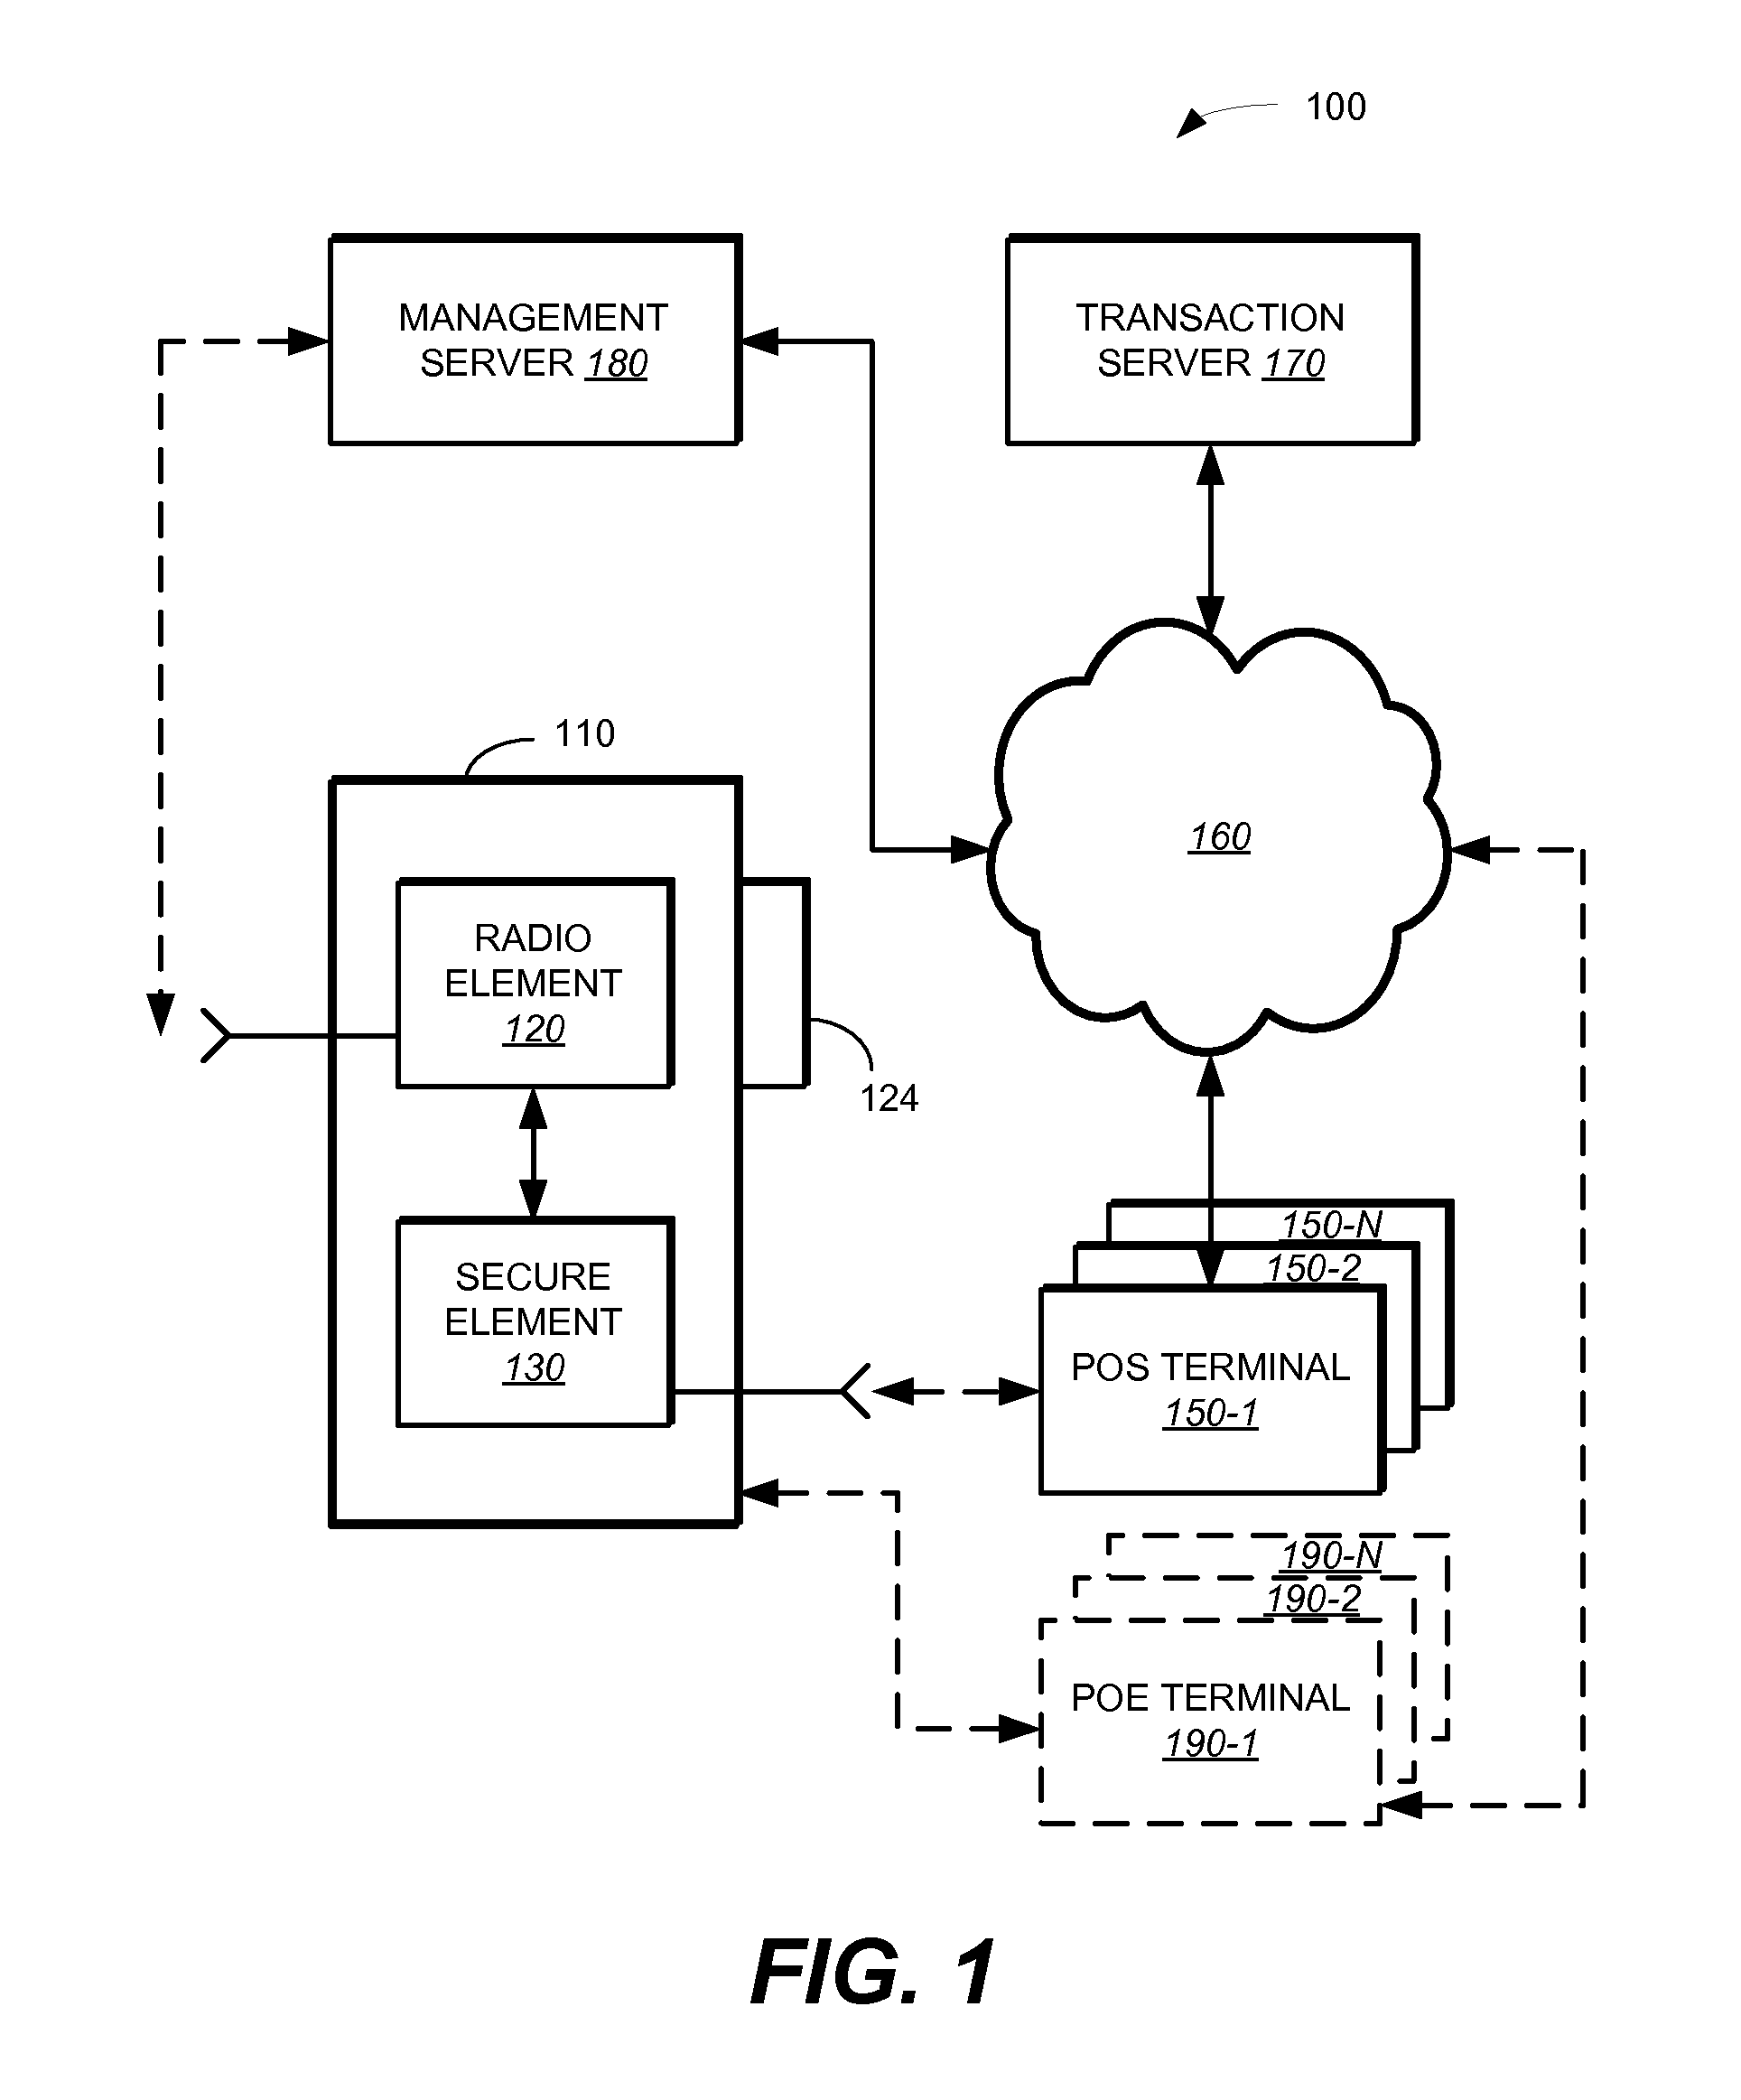 Method and system for adapting a wireless mobile communication device for wireless transactions